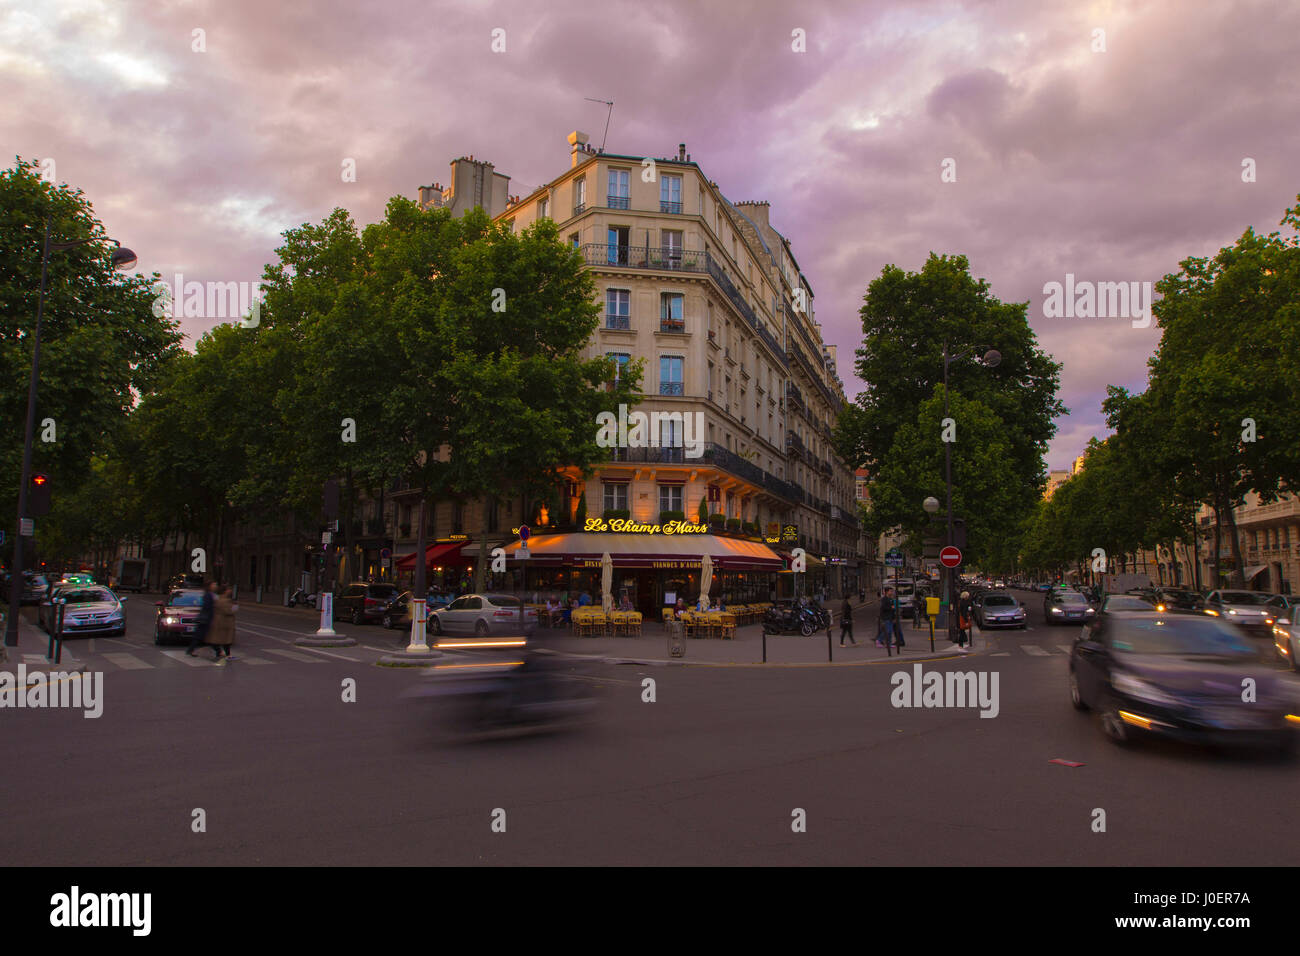 A city scene in Paris, France at dusk. Stock Photo